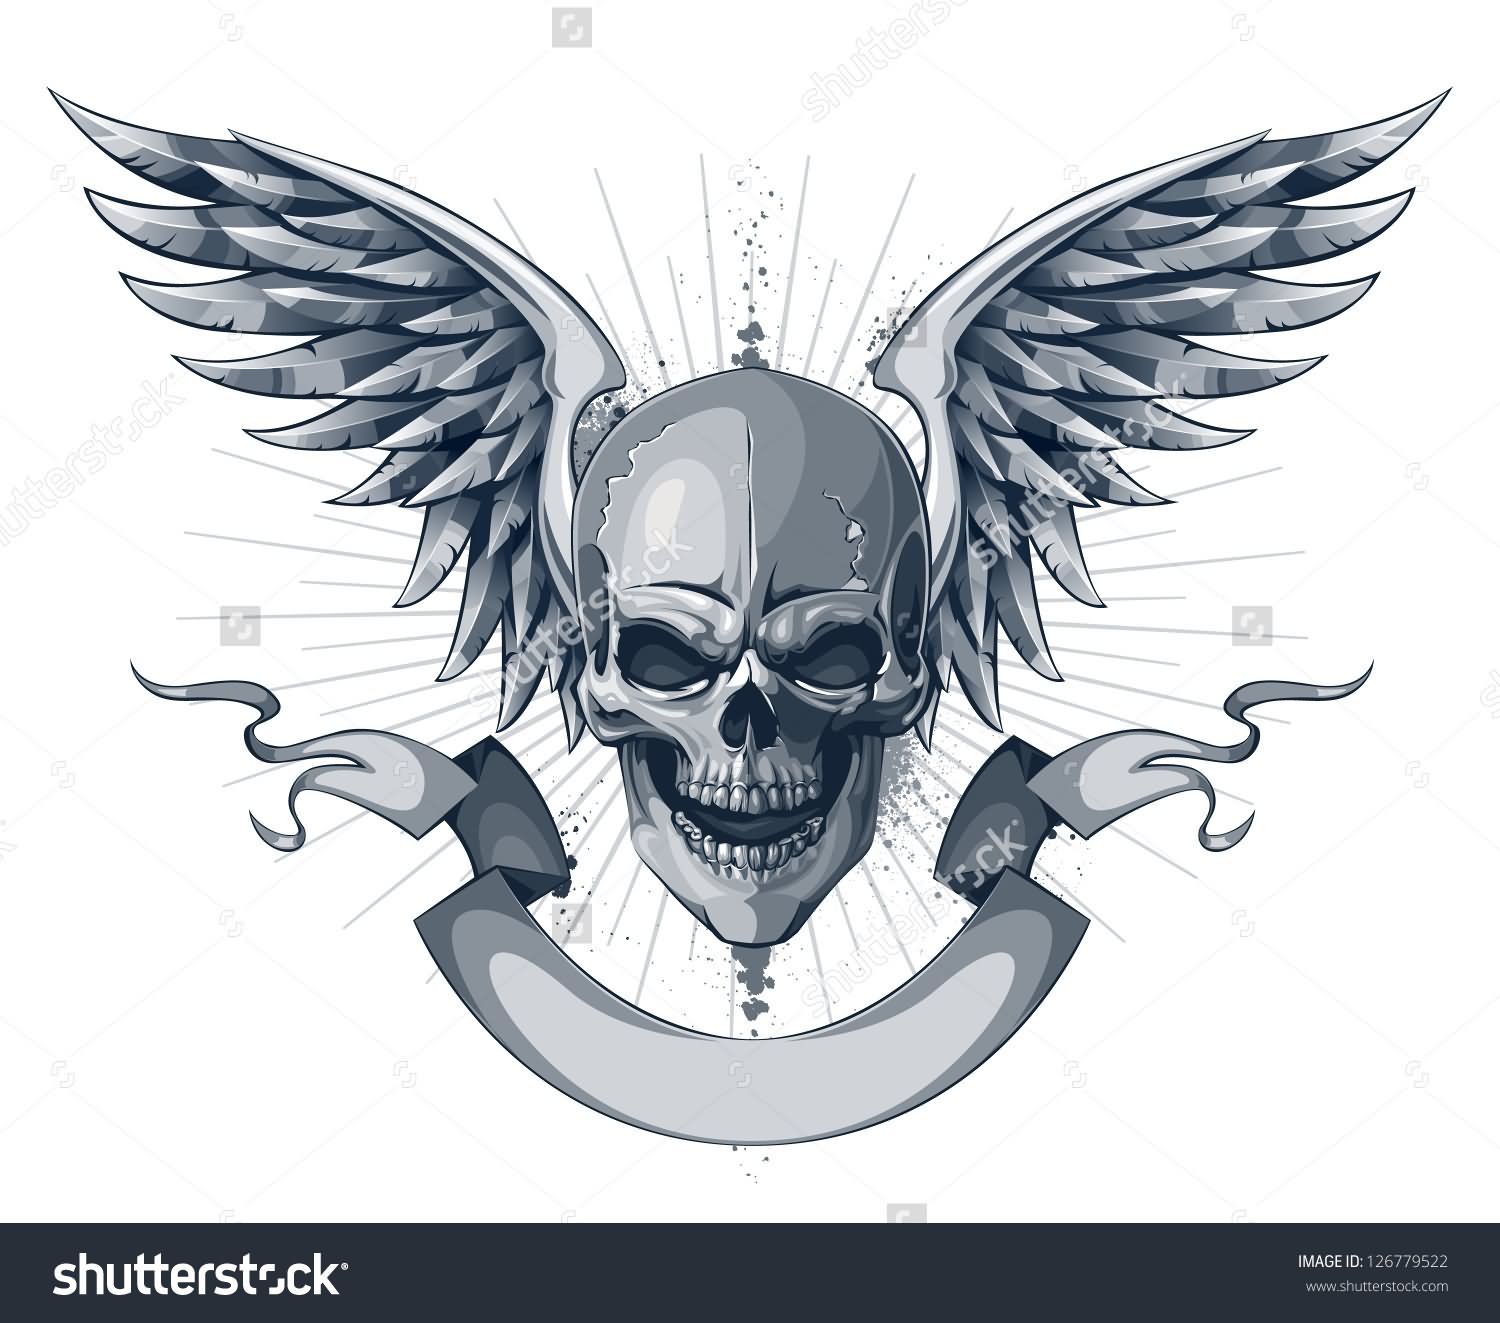 Skull With Wings And Scroll Ribbon Tattoo Design